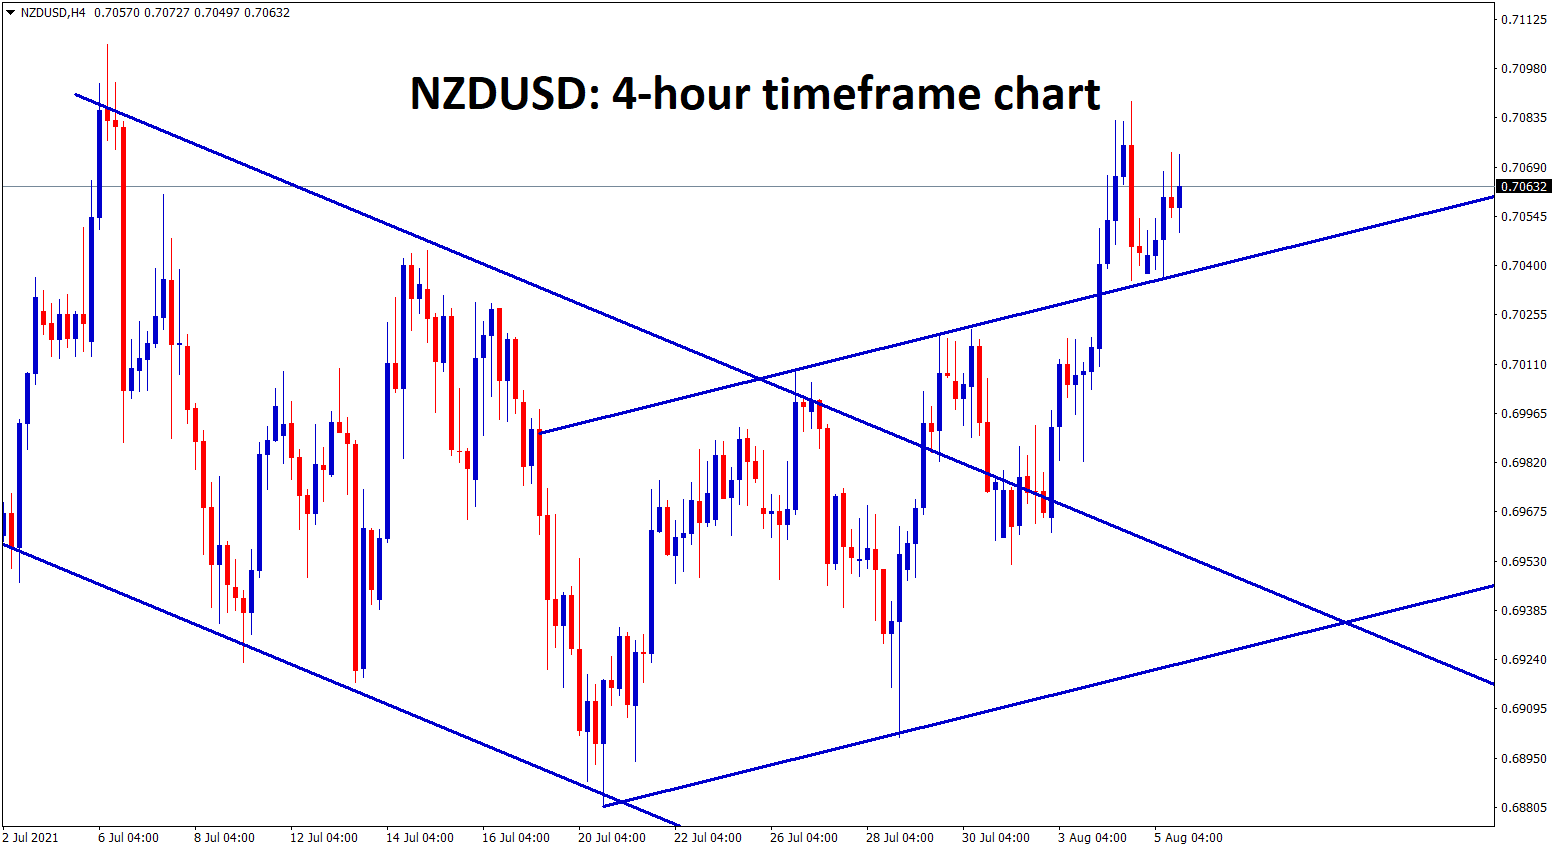 NZDUSD has retested the broken channel line and moving up